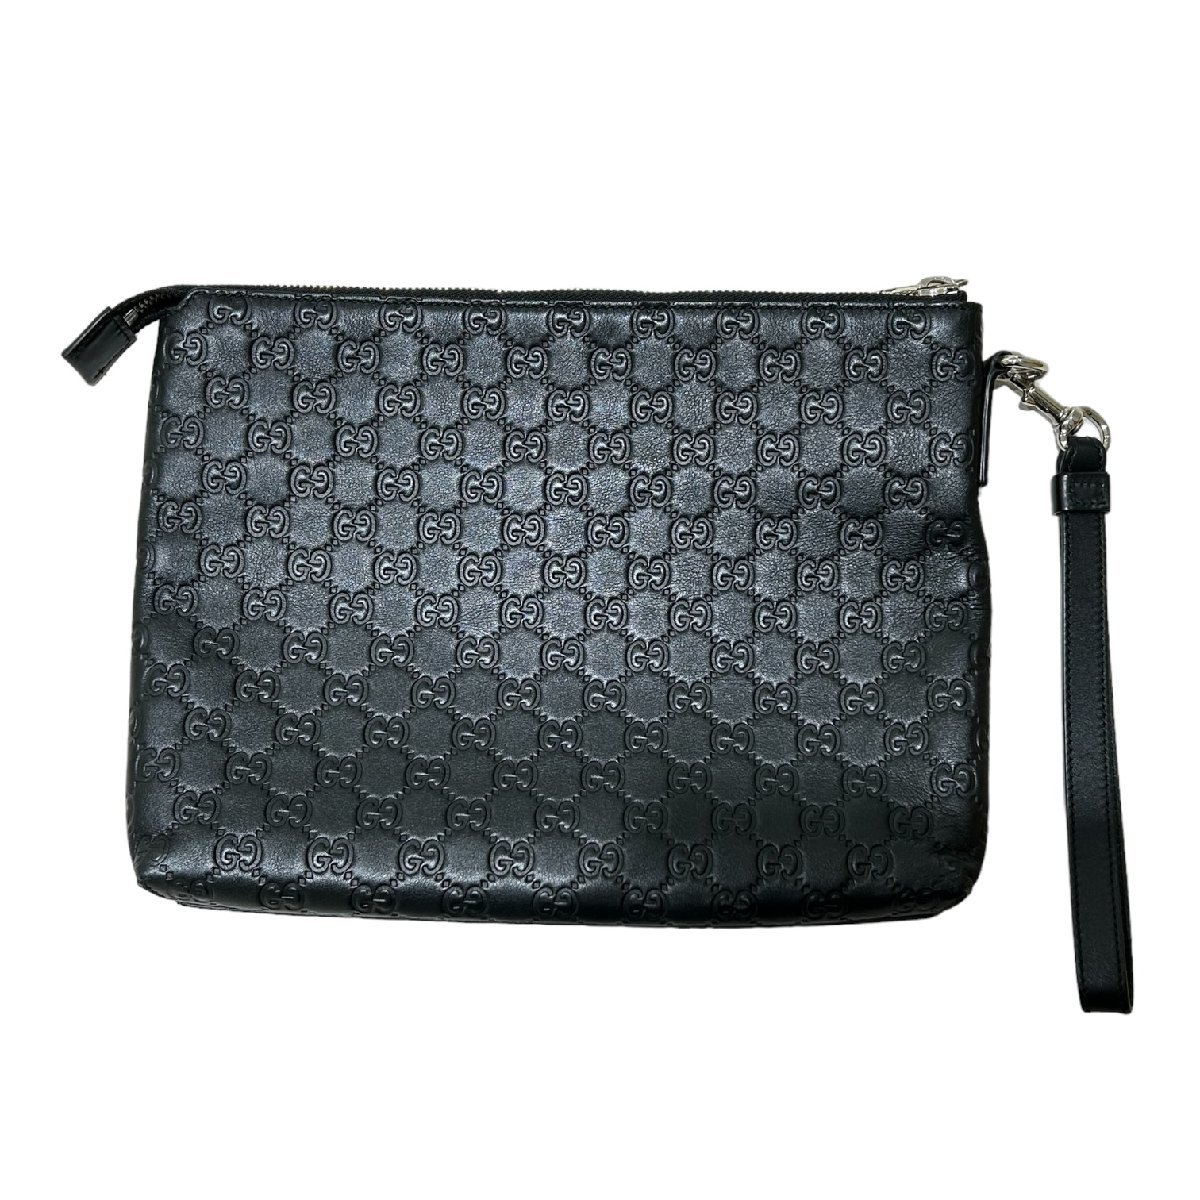 GUCCI Gucci 473881 second bag leather clutch bag black group men's GG pattern embossment [ used ]